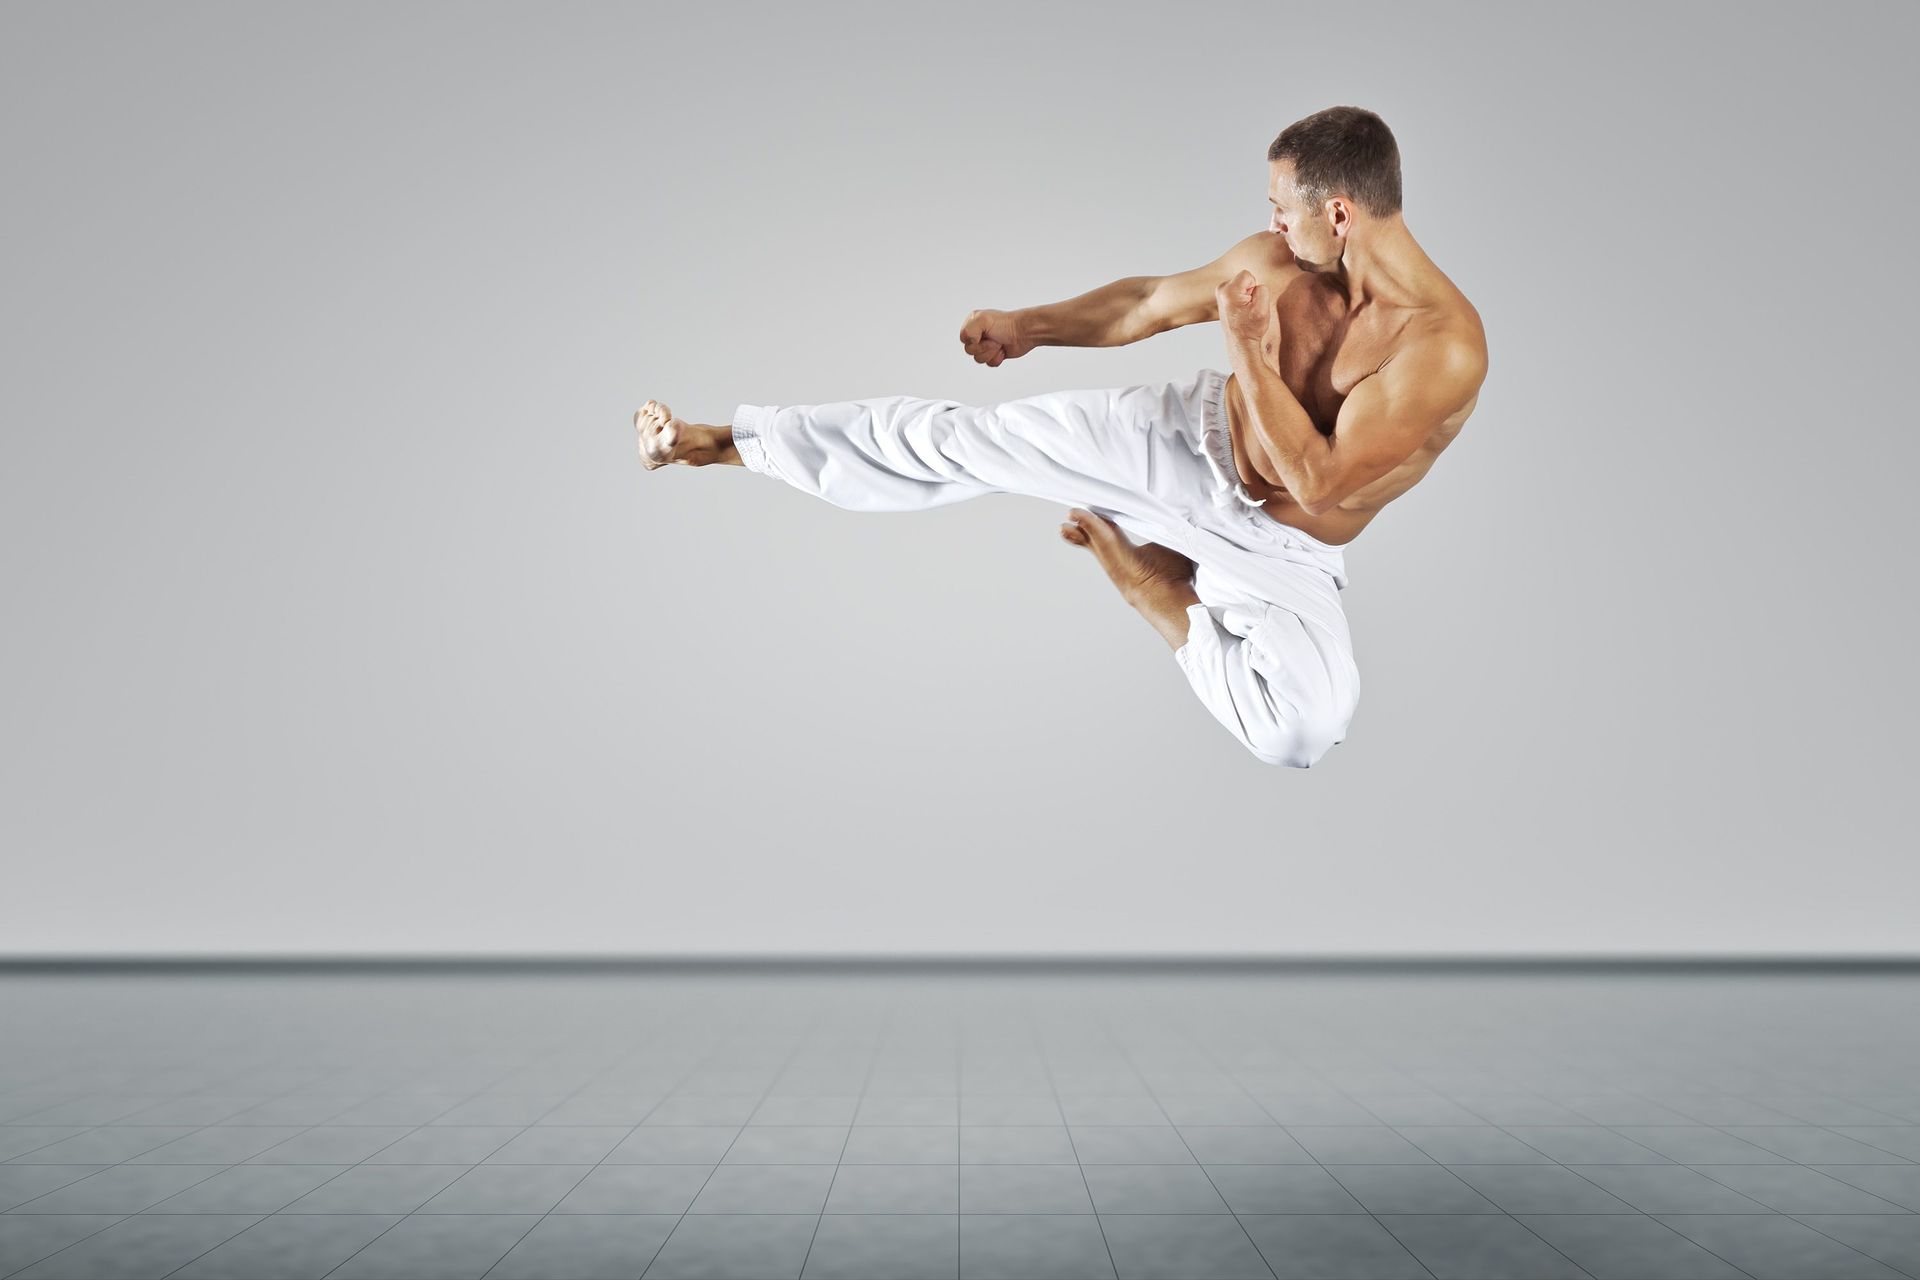 Man kicking in a martial arts style